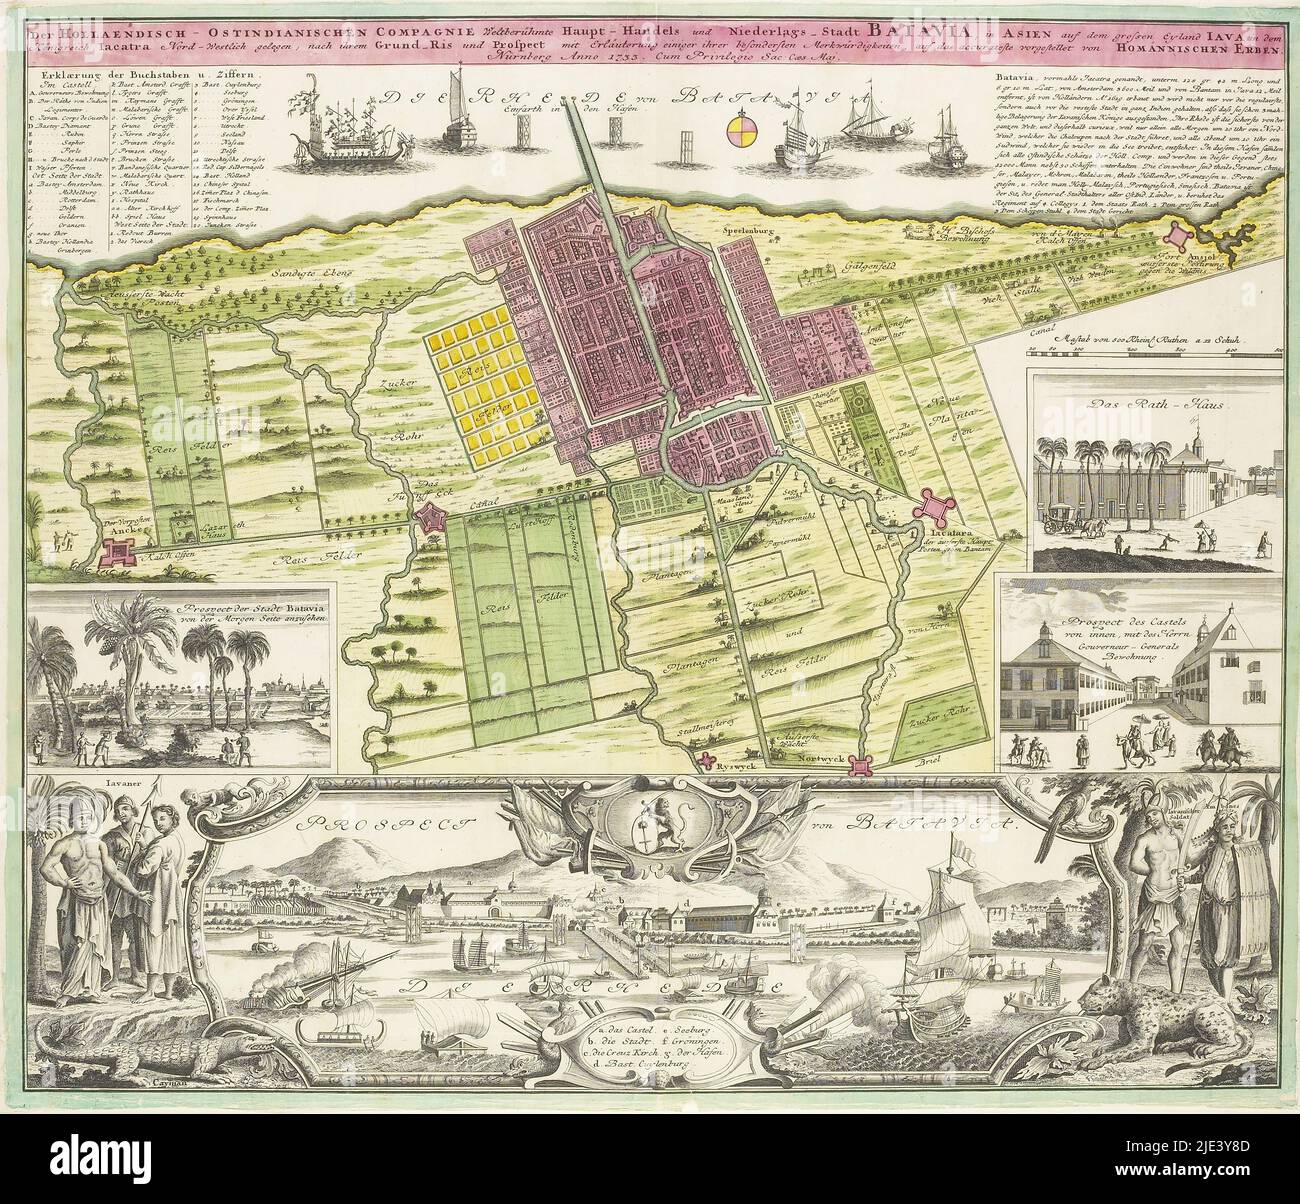 Map of and view of Batavia, anonymous, 1733, Above a map of Batavia. Below a view of Batavia, with a Dutch lion at the top bearing the coat of arms of Batavia and figures on the left and right depicting the original inhabitants of Java. Along the right edge a view of the Castle and Town Hall of Batavia., print maker: anonymous, publisher: erven Johann Baptista Homann, (mentioned on object), unknown, (mentioned on object), Neurenberg, 1733, paper, etching, engraving, h 472 mm - w 557 mm Stock Photo